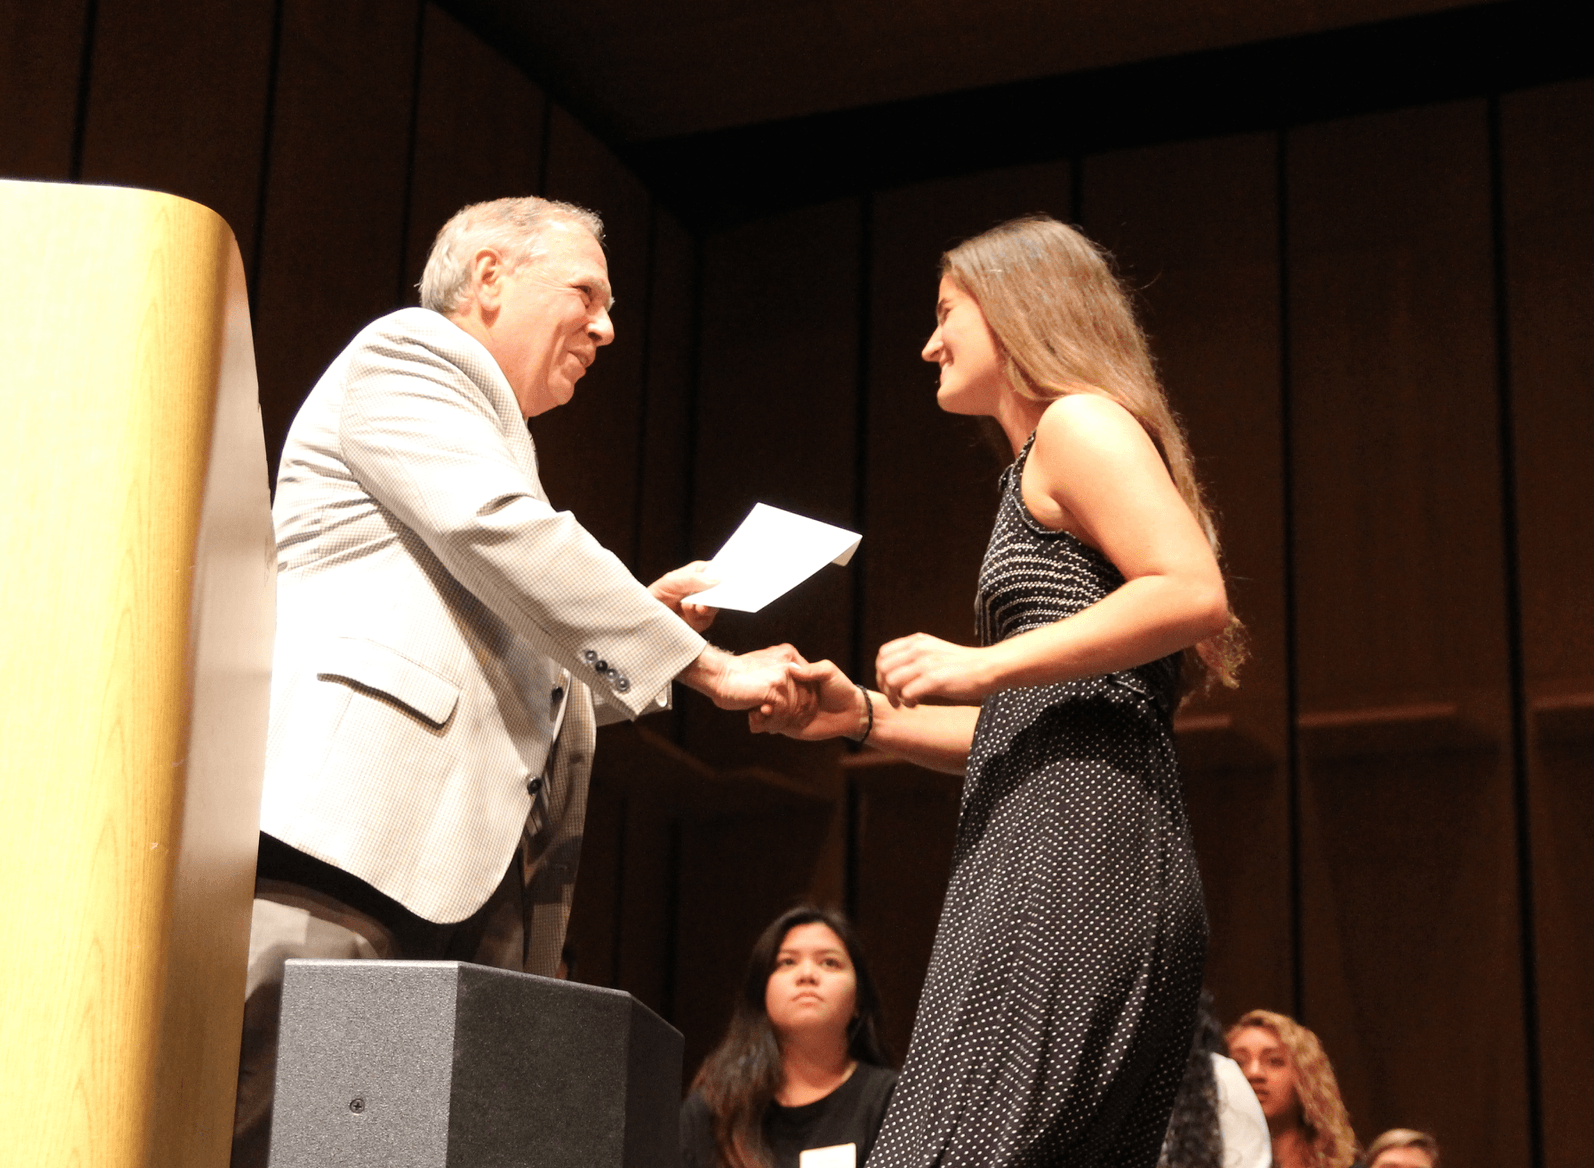 The Greenwich Scholarship Association presented scholarships totaling over $500,000 to selected members of the Class of 2018. June 7, 2018